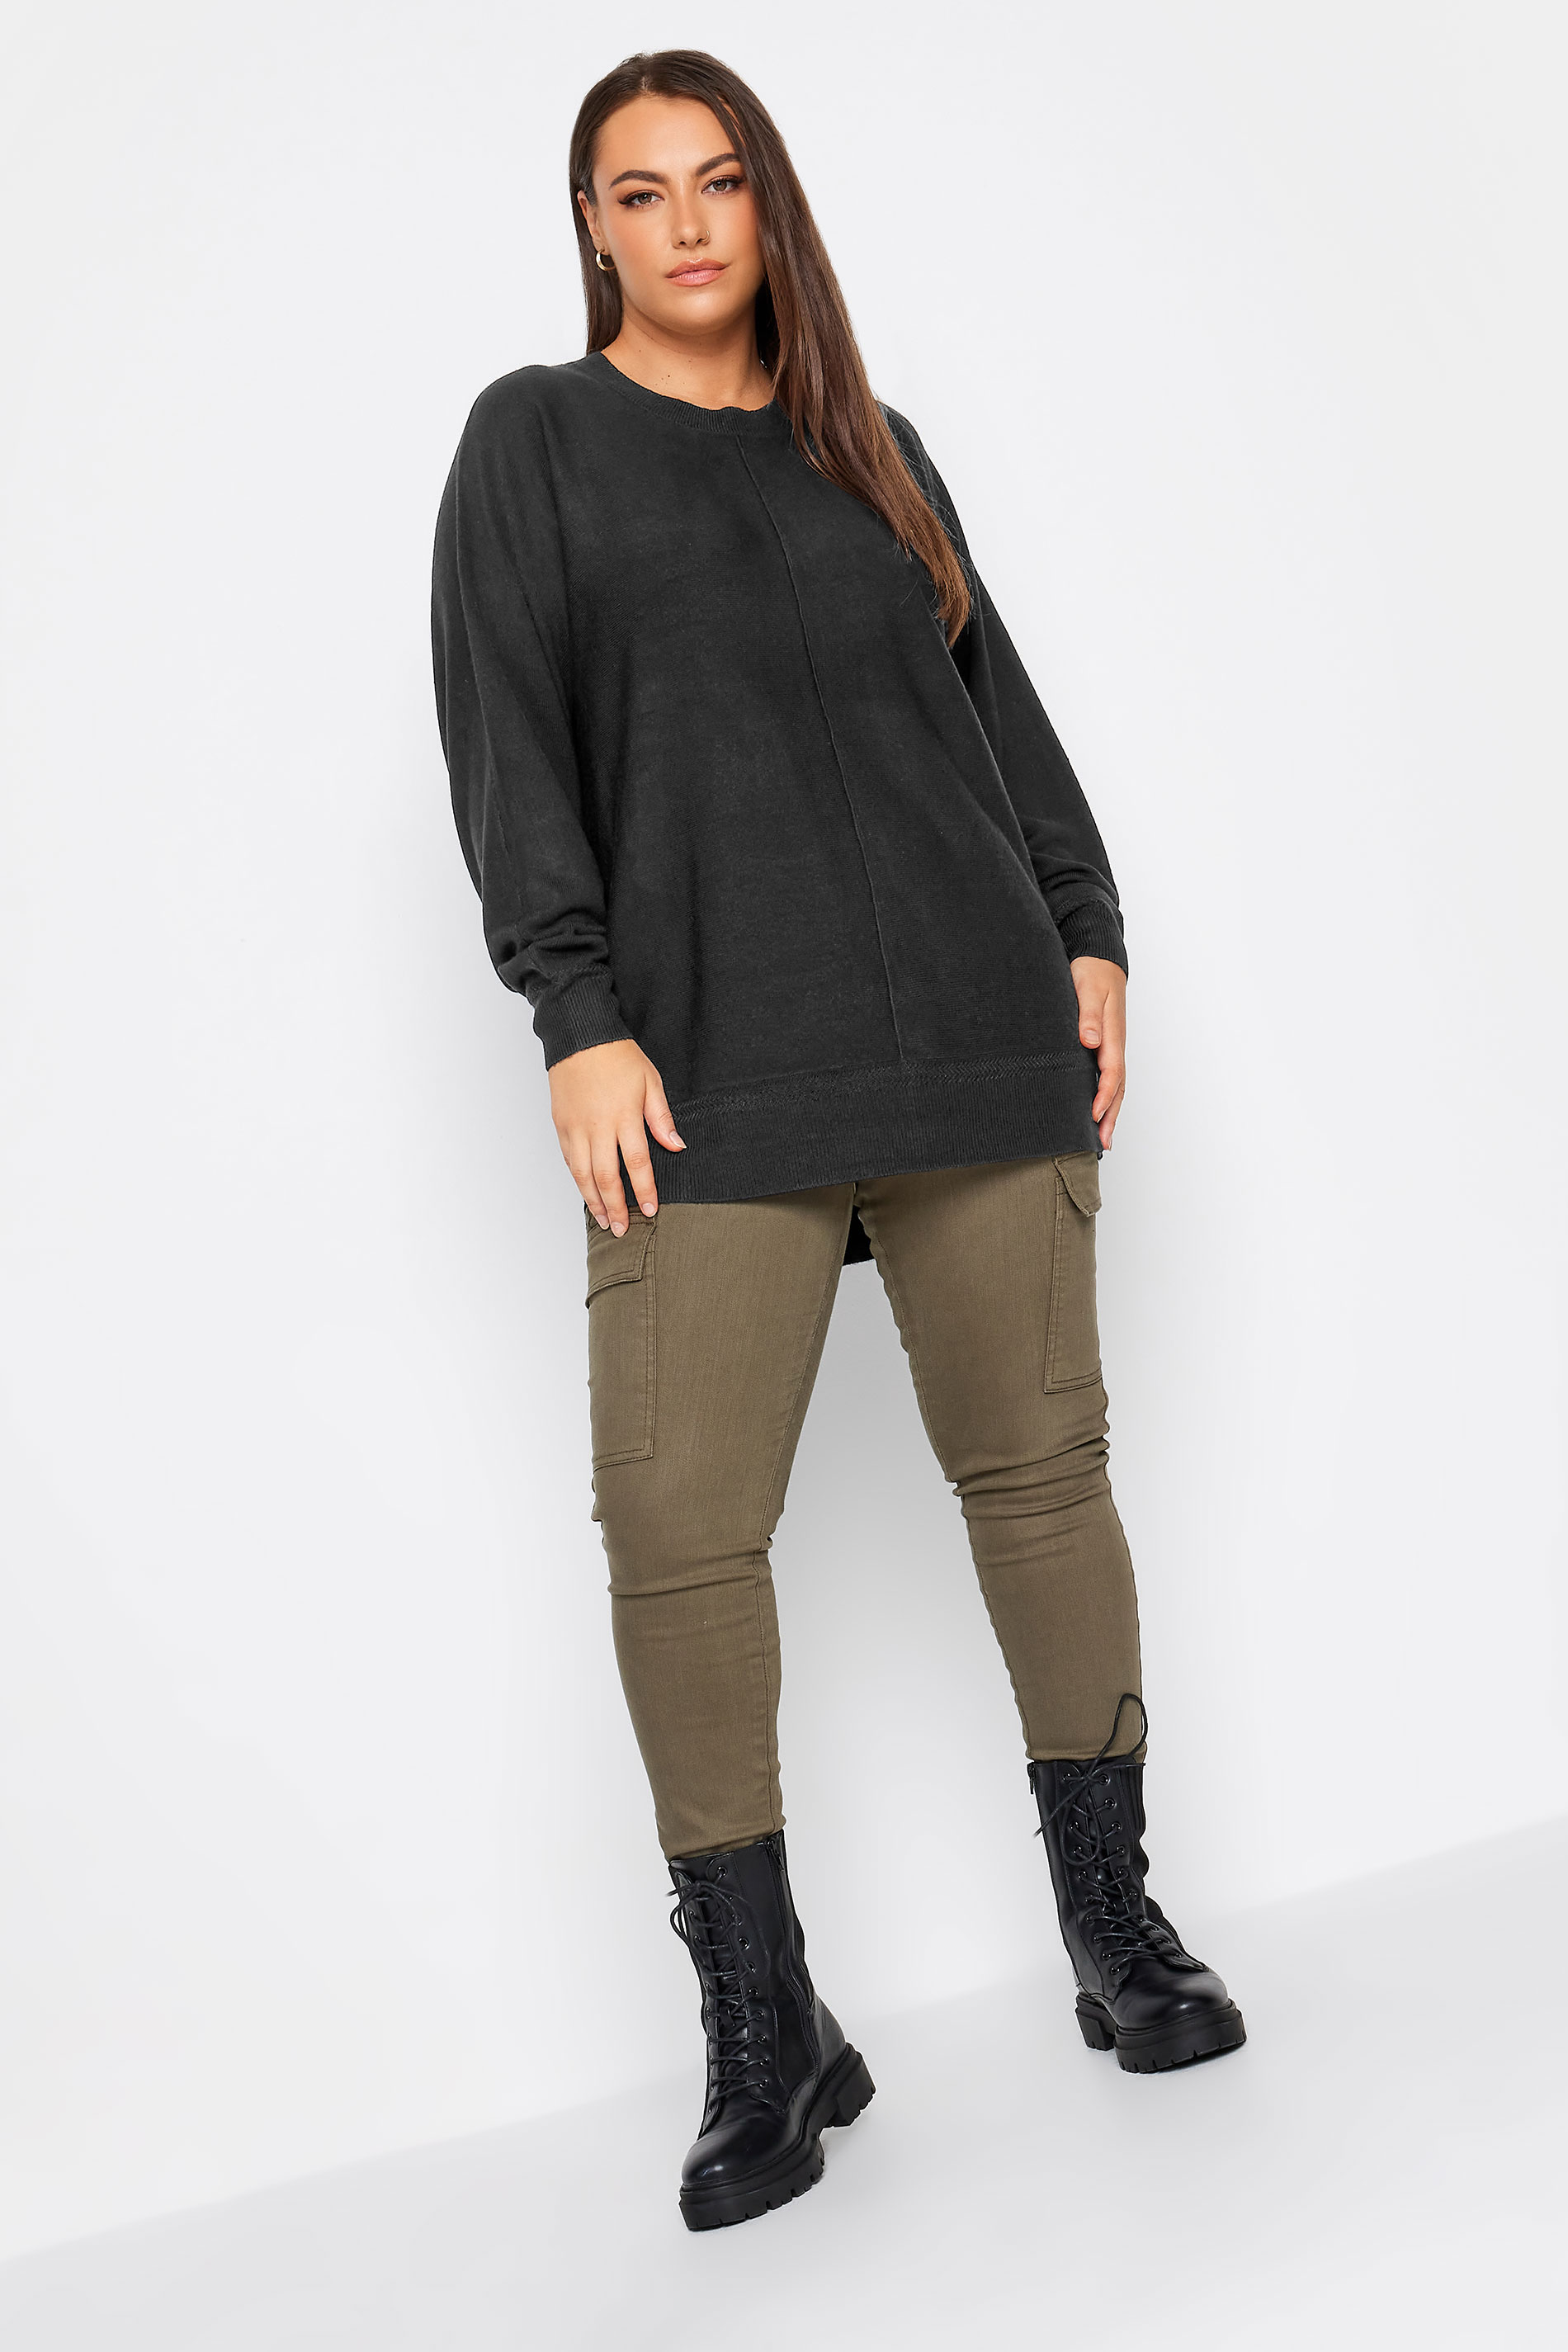 YOURS Plus Size Black Front Seam Detail Jumper | Yours Clothing 2